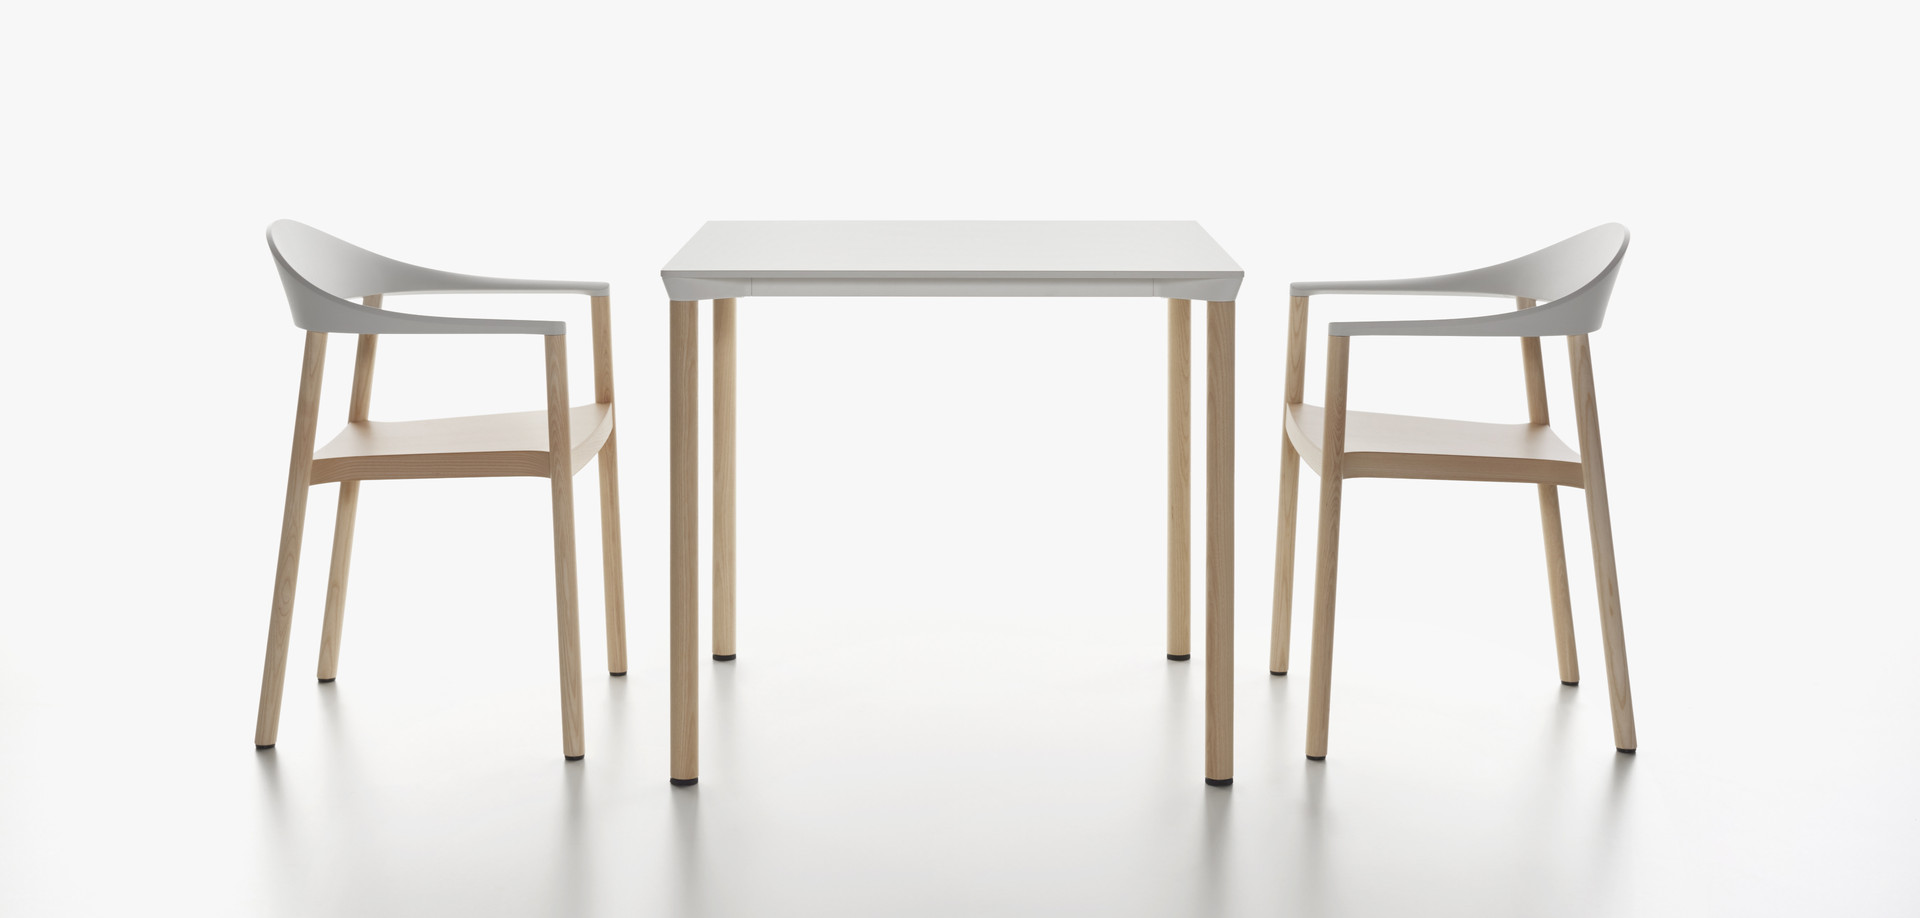 Plank - MONZA table square, white HPL table top, natural ash legs - MONZA armchair